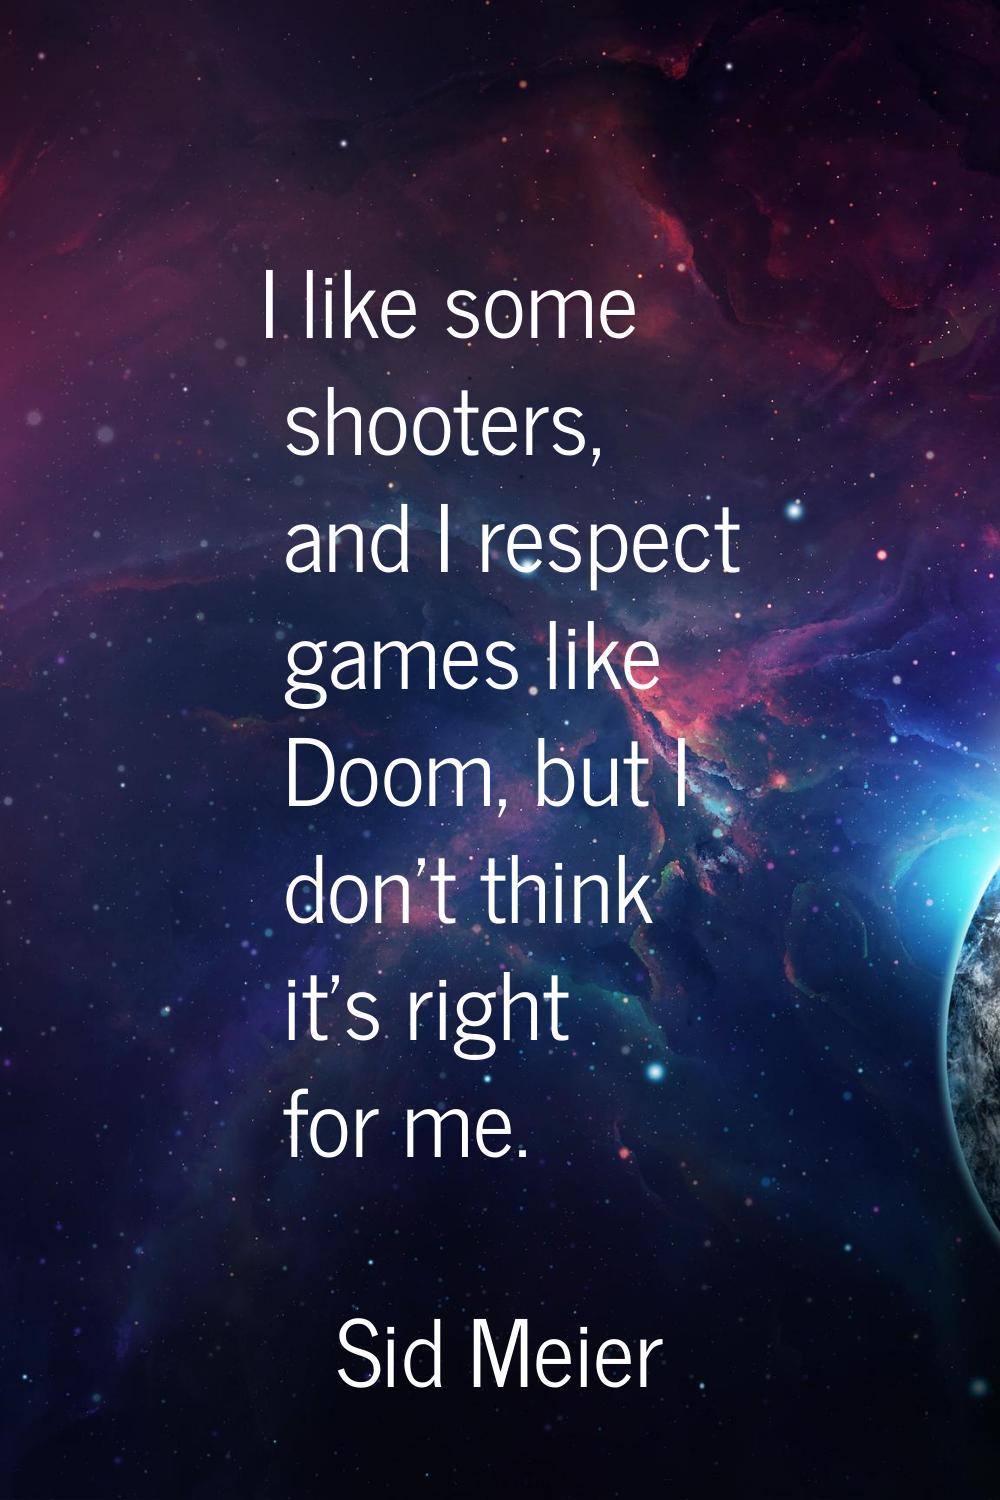 I like some shooters, and I respect games like Doom, but I don't think it's right for me.